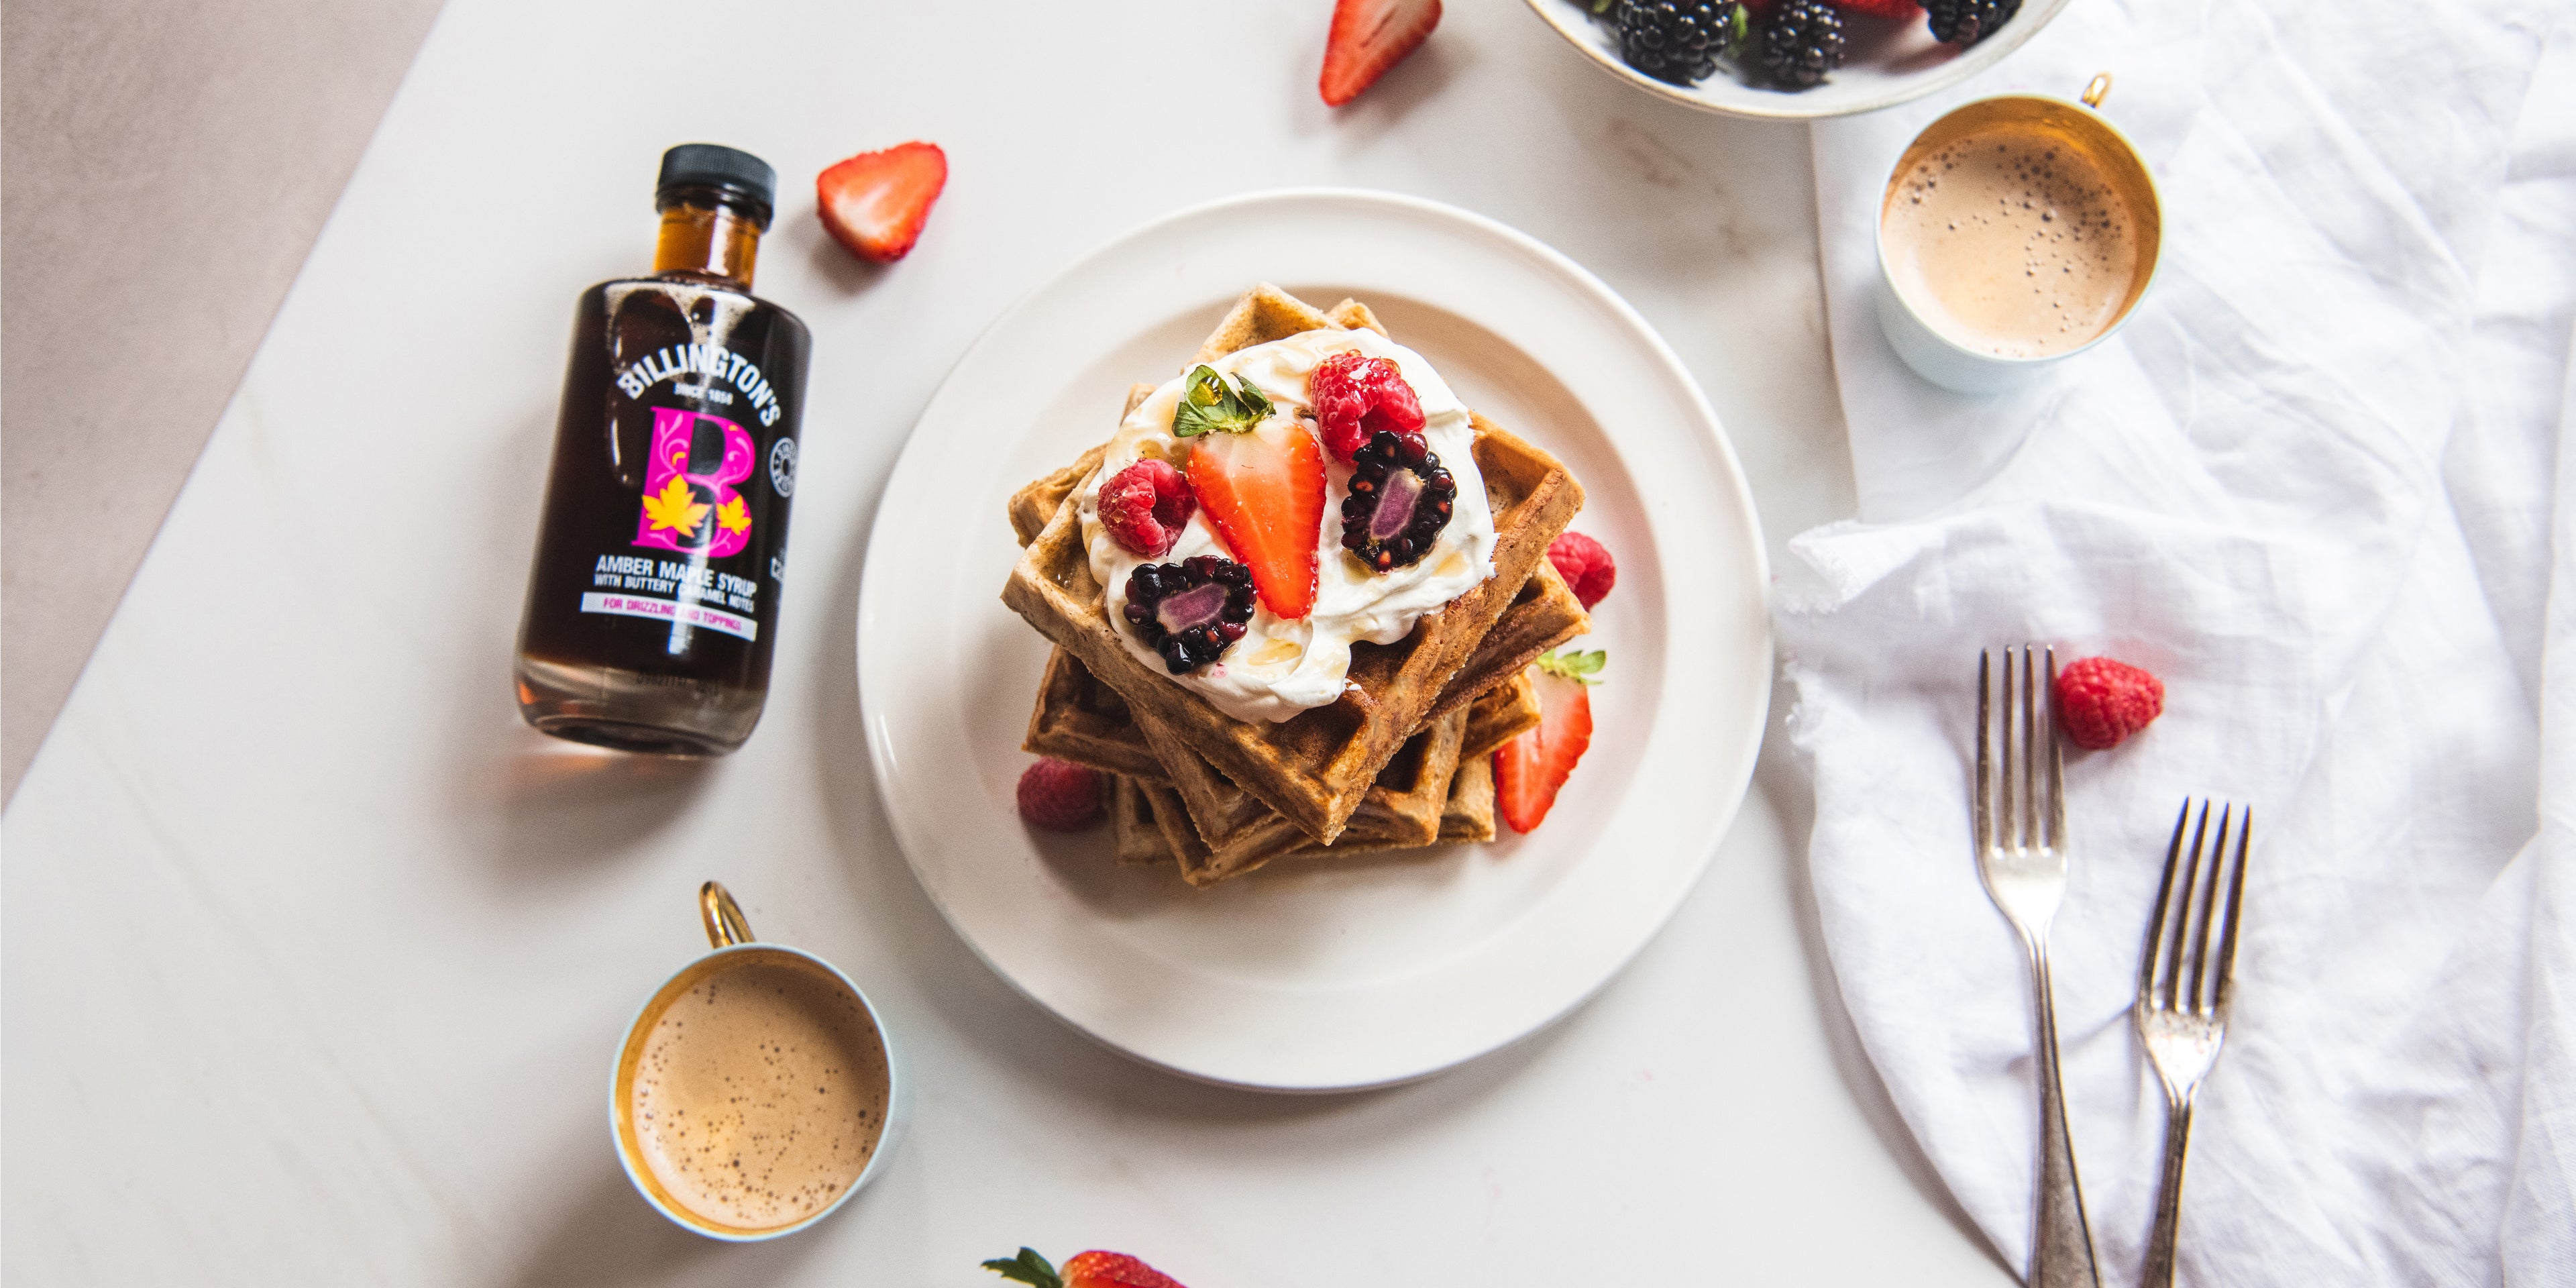 Top view of Wholemeal Banana Waffles next to a bottle of Billington's Syrup, berries and cutlery 